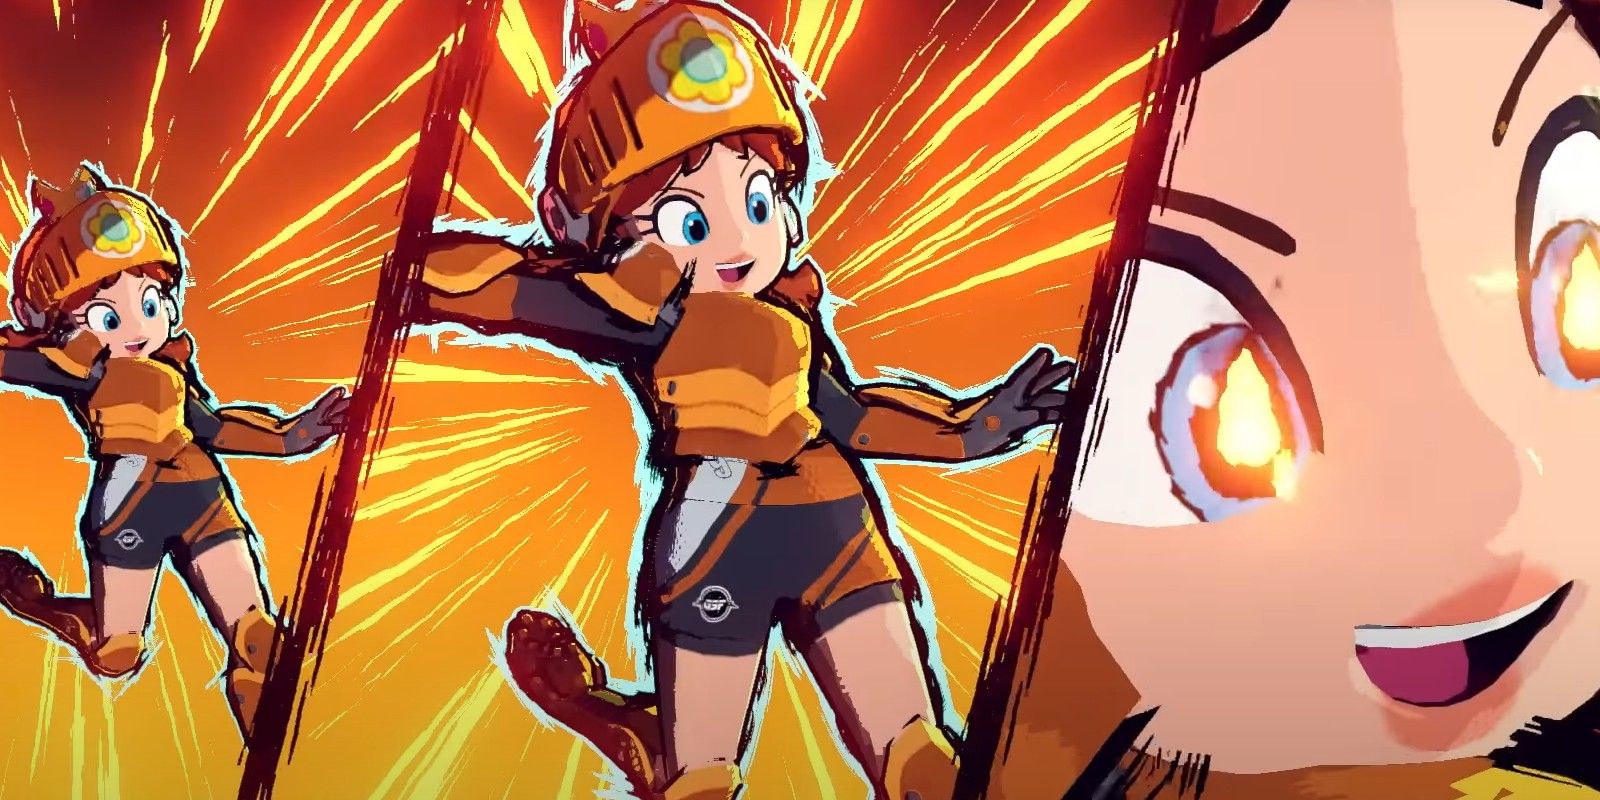 Daisy was added in Mario Strikers: Battle League's first free content update.